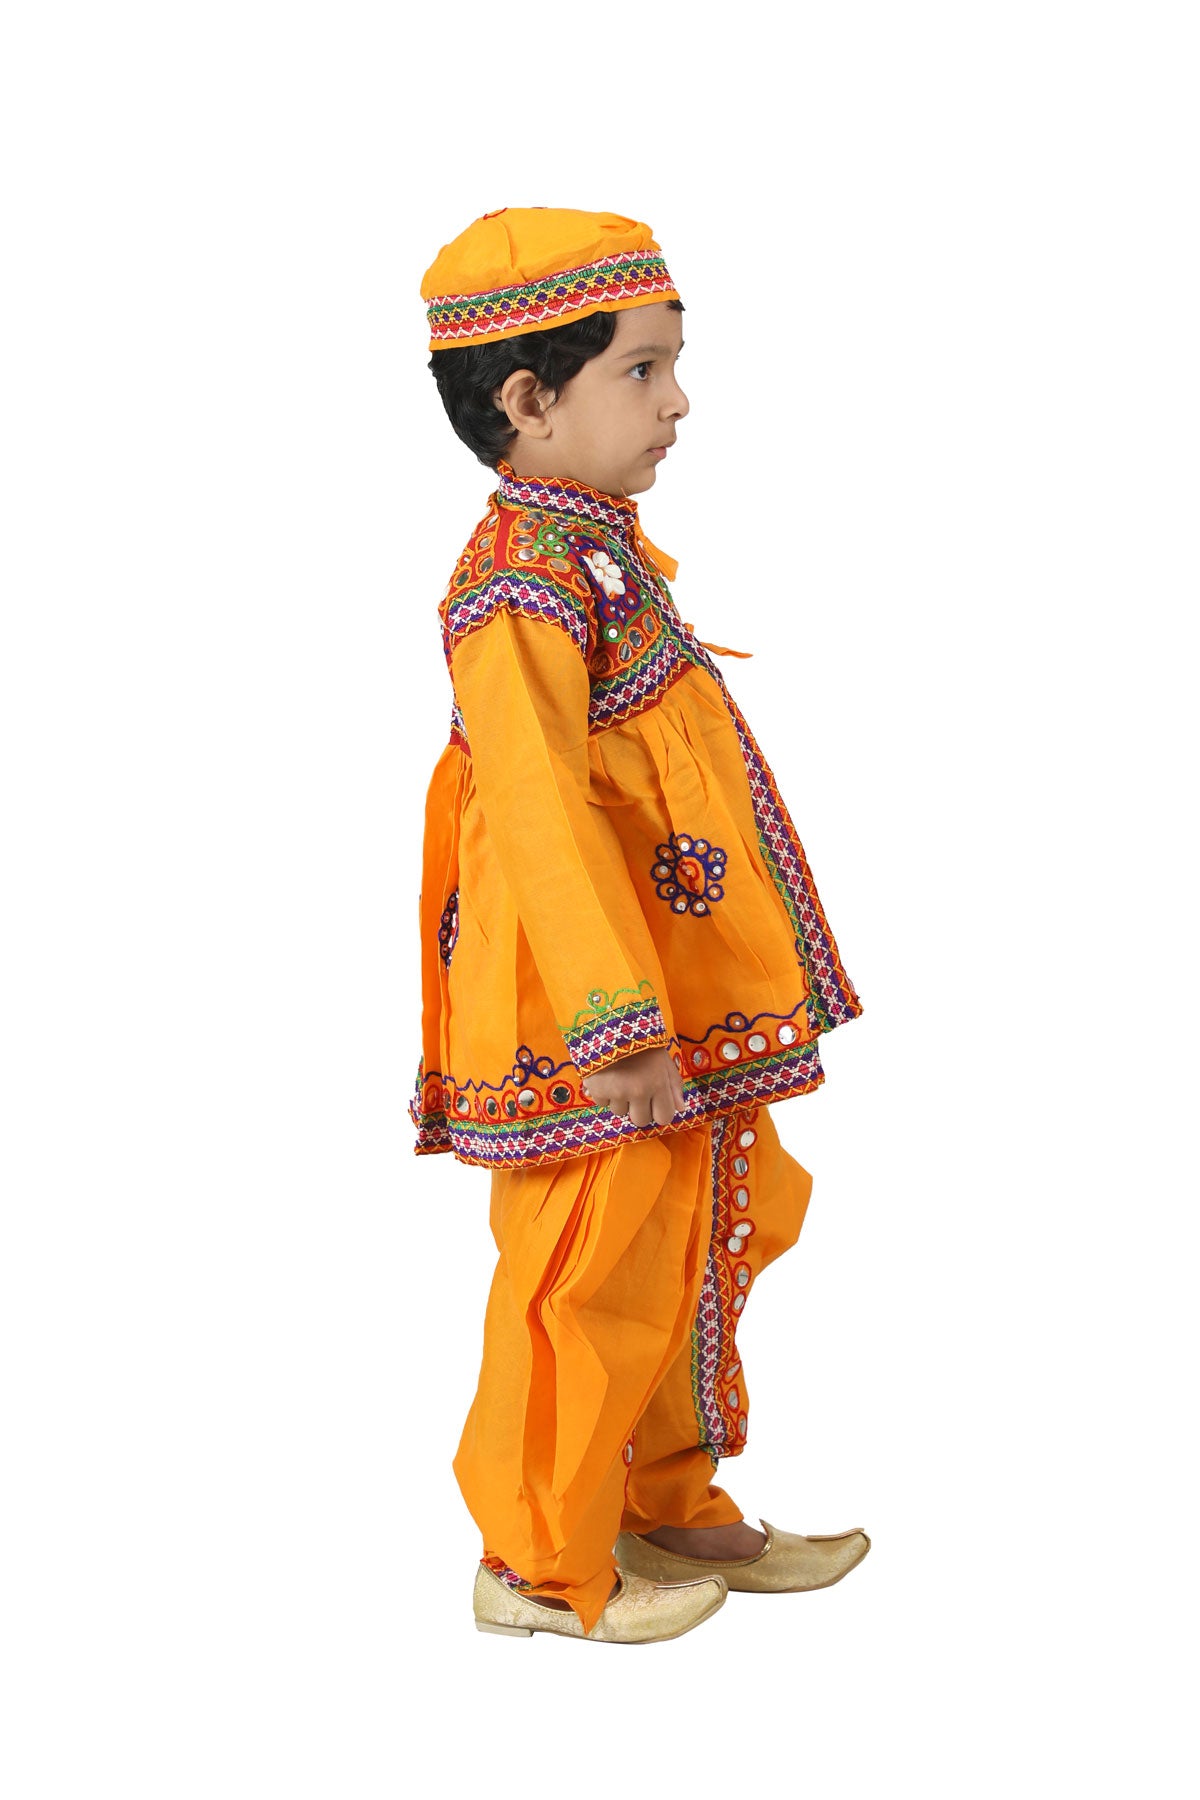 Buy Kaku Fancy Dresses Indian State Haryanvi Dance Costume for Kids White  Kurta Costume For Boy - White, 3-4 Years Online at Low Prices in India -  Amazon.in